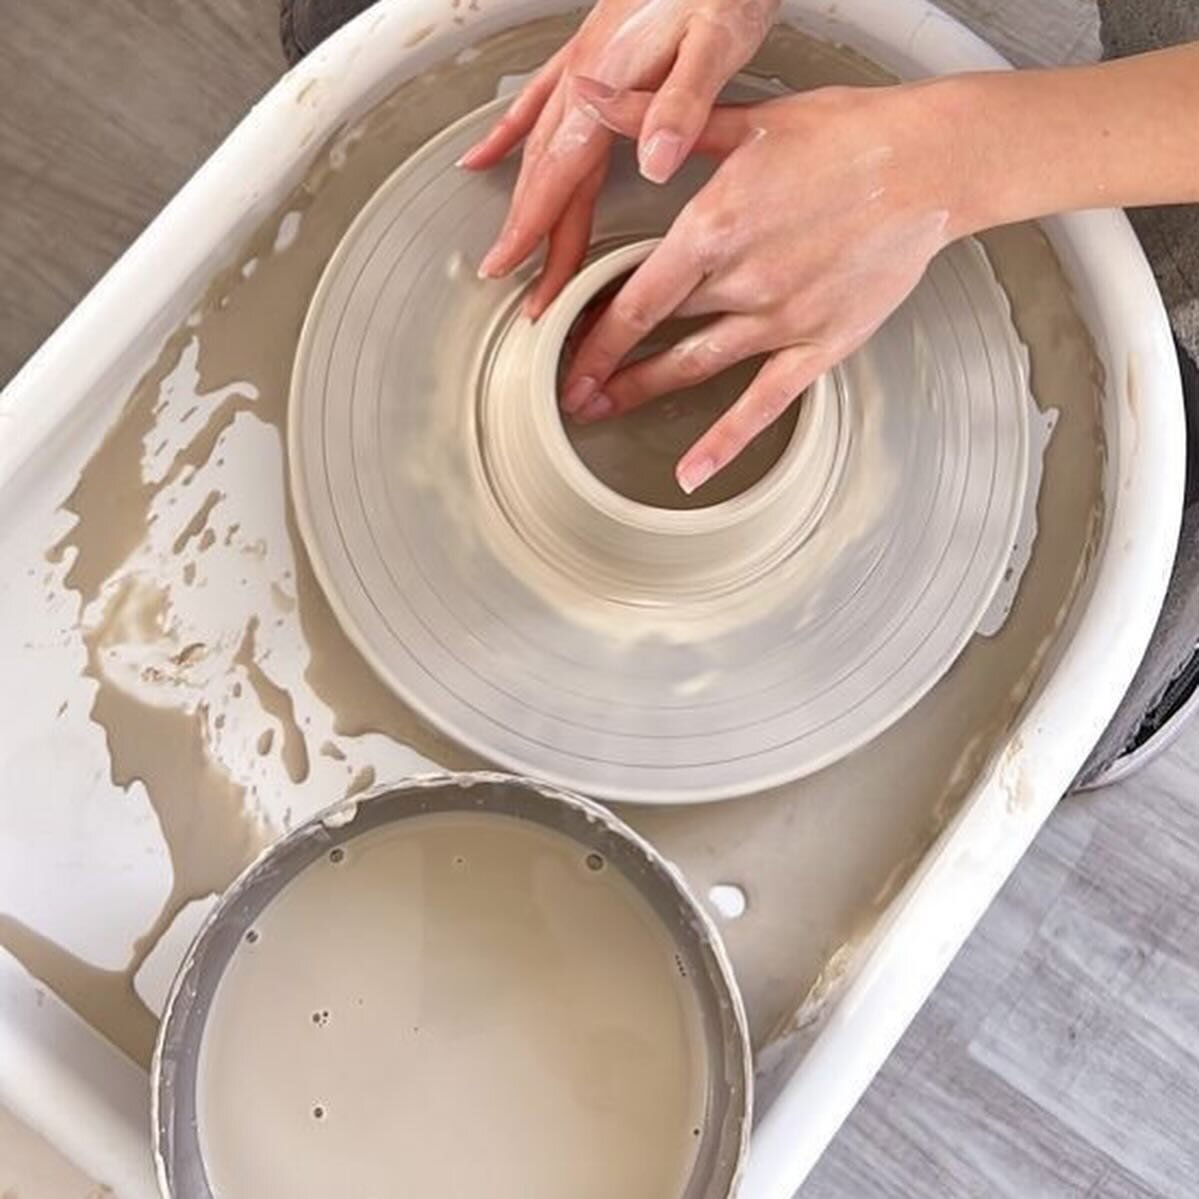 We&rsquo;re so excited to be bringing you Wheel Throwing Classes over the next few months! It has been requested by so many of you who want to have a go on a pottery wheel, so we know this one&rsquo;s going to be super popular. Keep an eye out on web